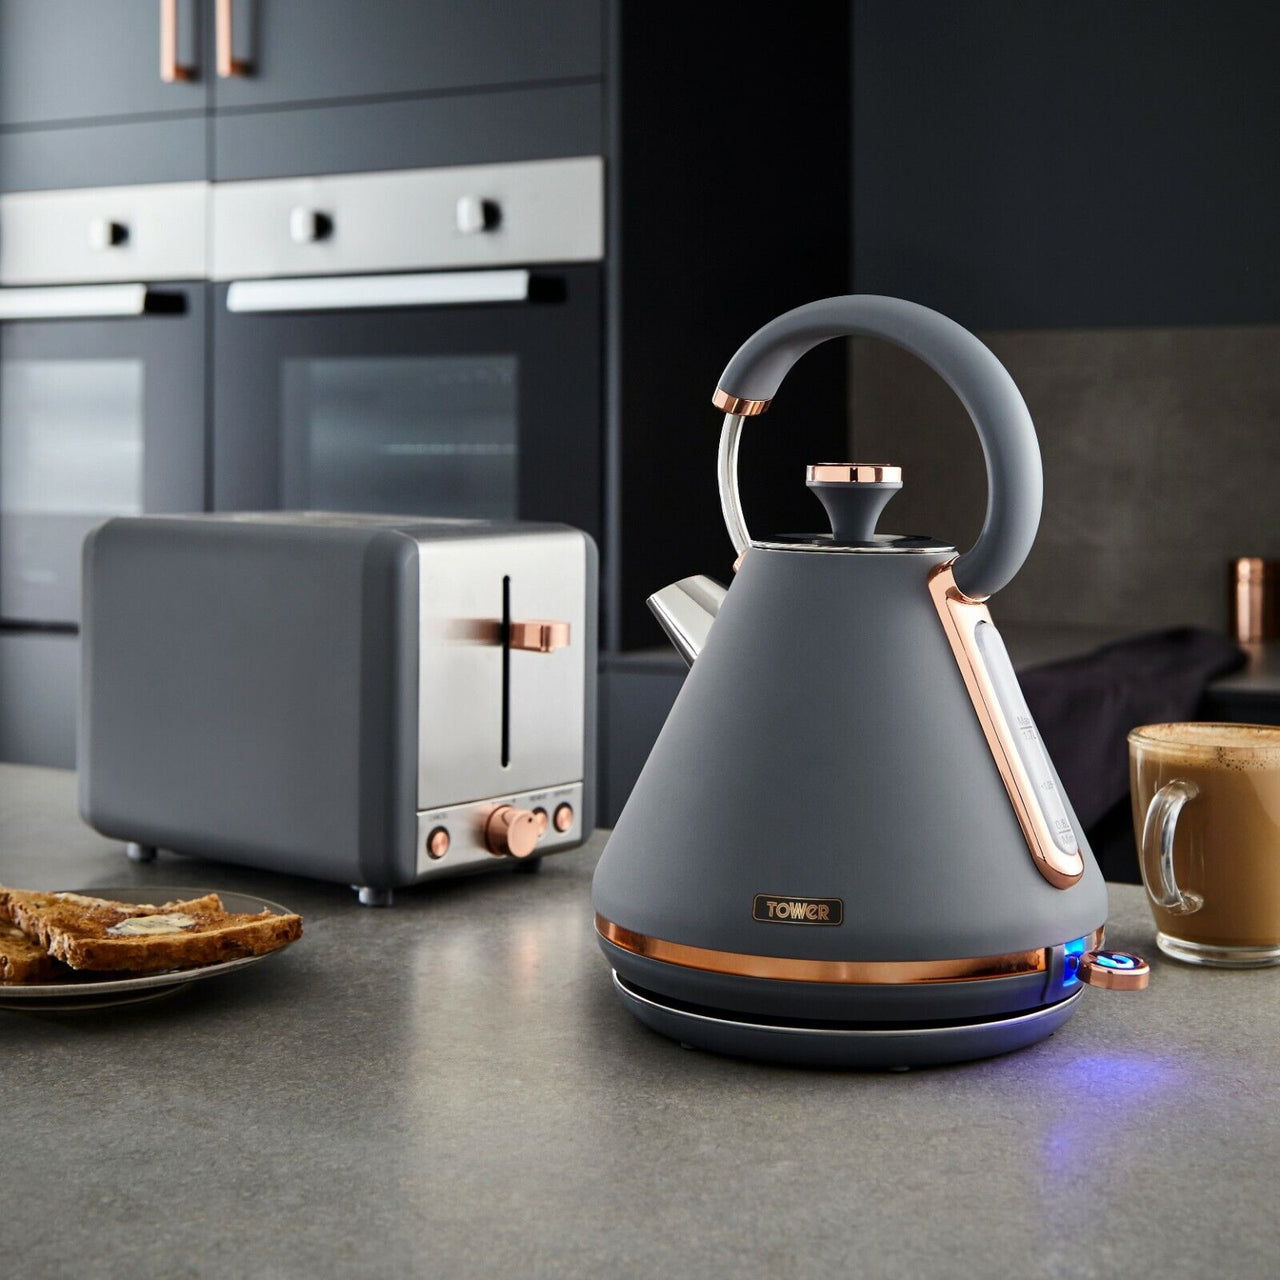 Tower Cavaletto 1.7L Pyramid Kettle & 2 Slice Toaster Set in Grey/Rose Gold